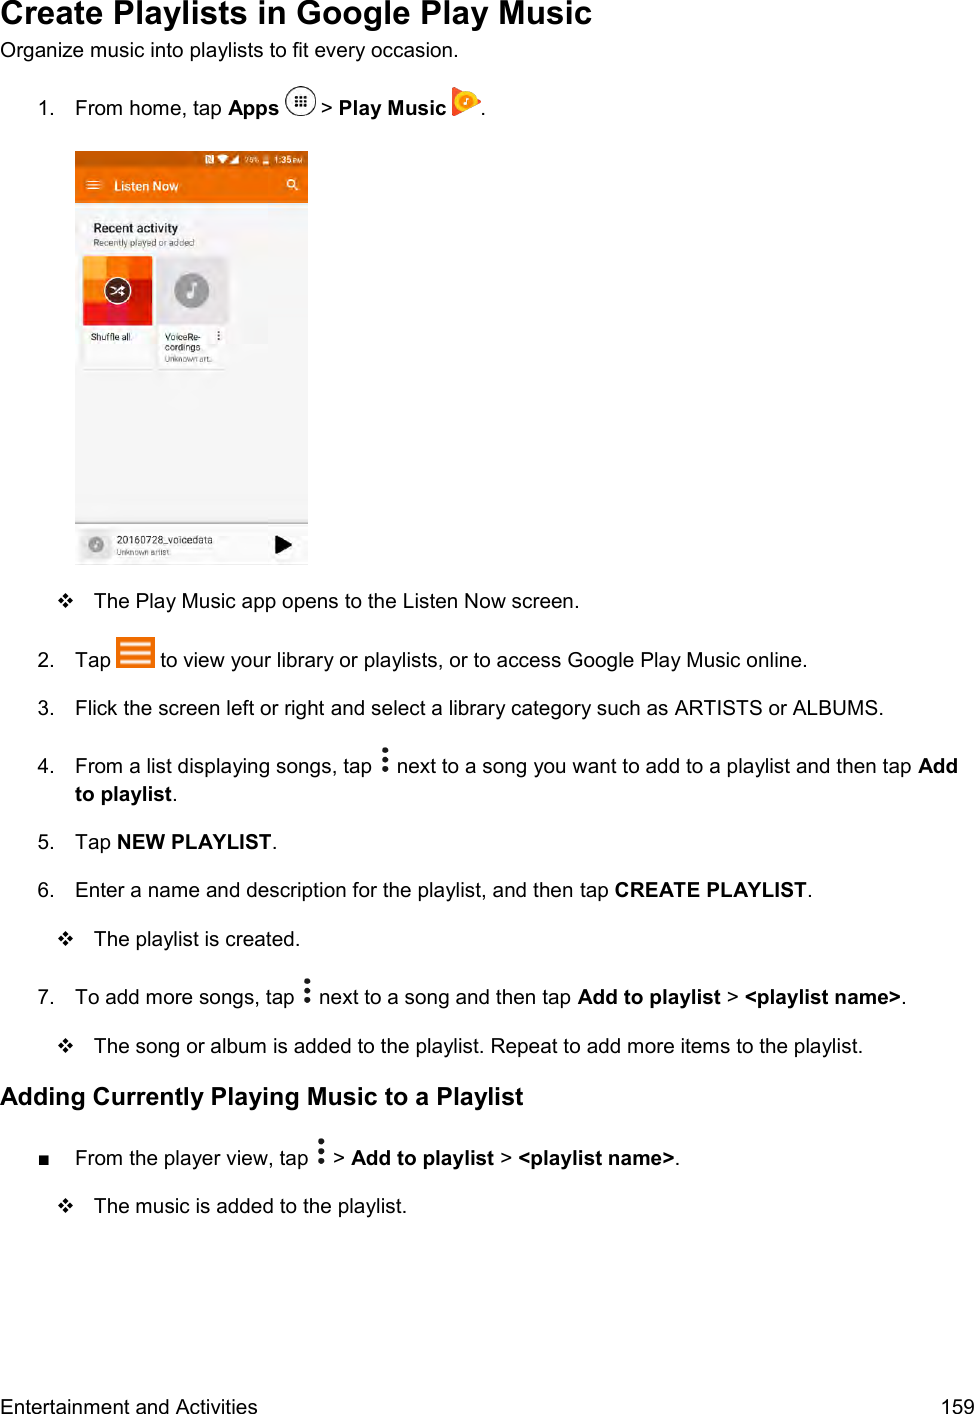  Entertainment and Activities  159 Create Playlists in Google Play Music Organize music into playlists to fit every occasion. 1.  From home, tap Apps   &gt; Play Music  .     The Play Music app opens to the Listen Now screen. 2.  Tap   to view your library or playlists, or to access Google Play Music online. 3.  Flick the screen left or right and select a library category such as ARTISTS or ALBUMS.  4.  From a list displaying songs, tap   next to a song you want to add to a playlist and then tap Add to playlist. 5.  Tap NEW PLAYLIST.  6.  Enter a name and description for the playlist, and then tap CREATE PLAYLIST.   The playlist is created. 7.  To add more songs, tap   next to a song and then tap Add to playlist &gt; &lt;playlist name&gt;.    The song or album is added to the playlist. Repeat to add more items to the playlist. Adding Currently Playing Music to a Playlist ■  From the player view, tap   &gt; Add to playlist &gt; &lt;playlist name&gt;.   The music is added to the playlist. 